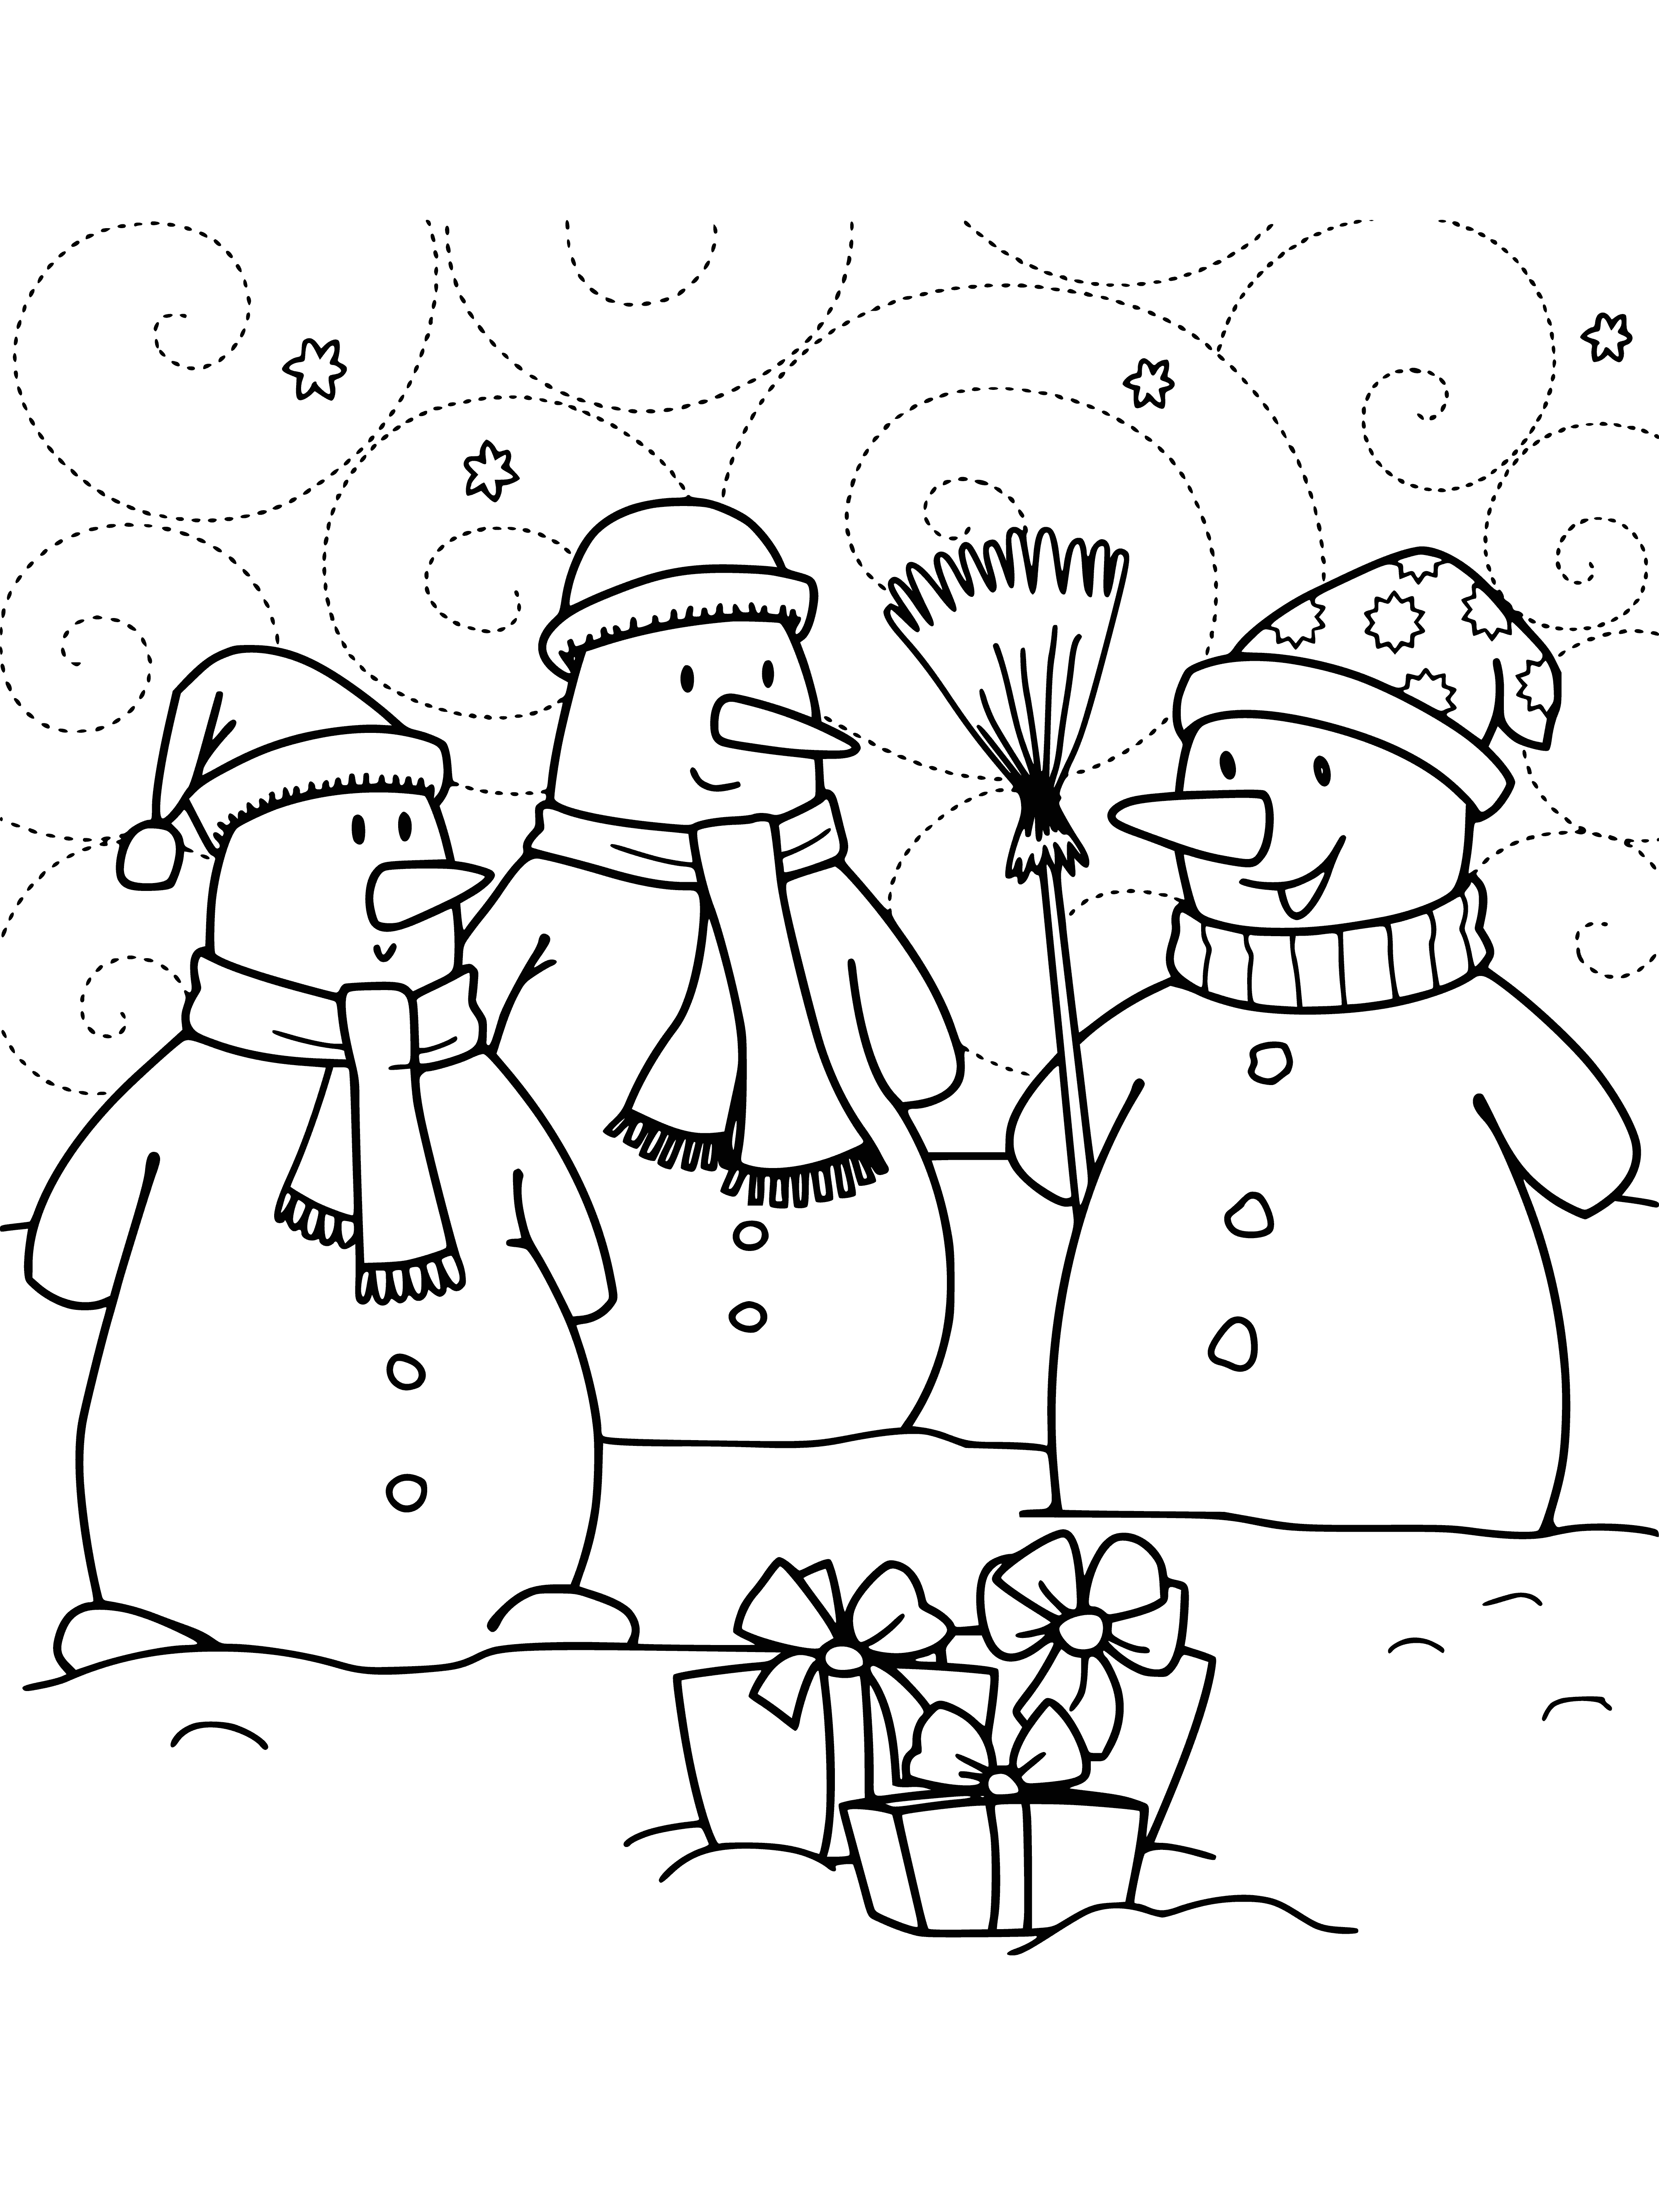 coloring page: Three snowmen, tallest w/ carrot nose, shorter two w/ coal eyes & mouth, all wearing hats & holding sticks. Standing on a layer of snow.